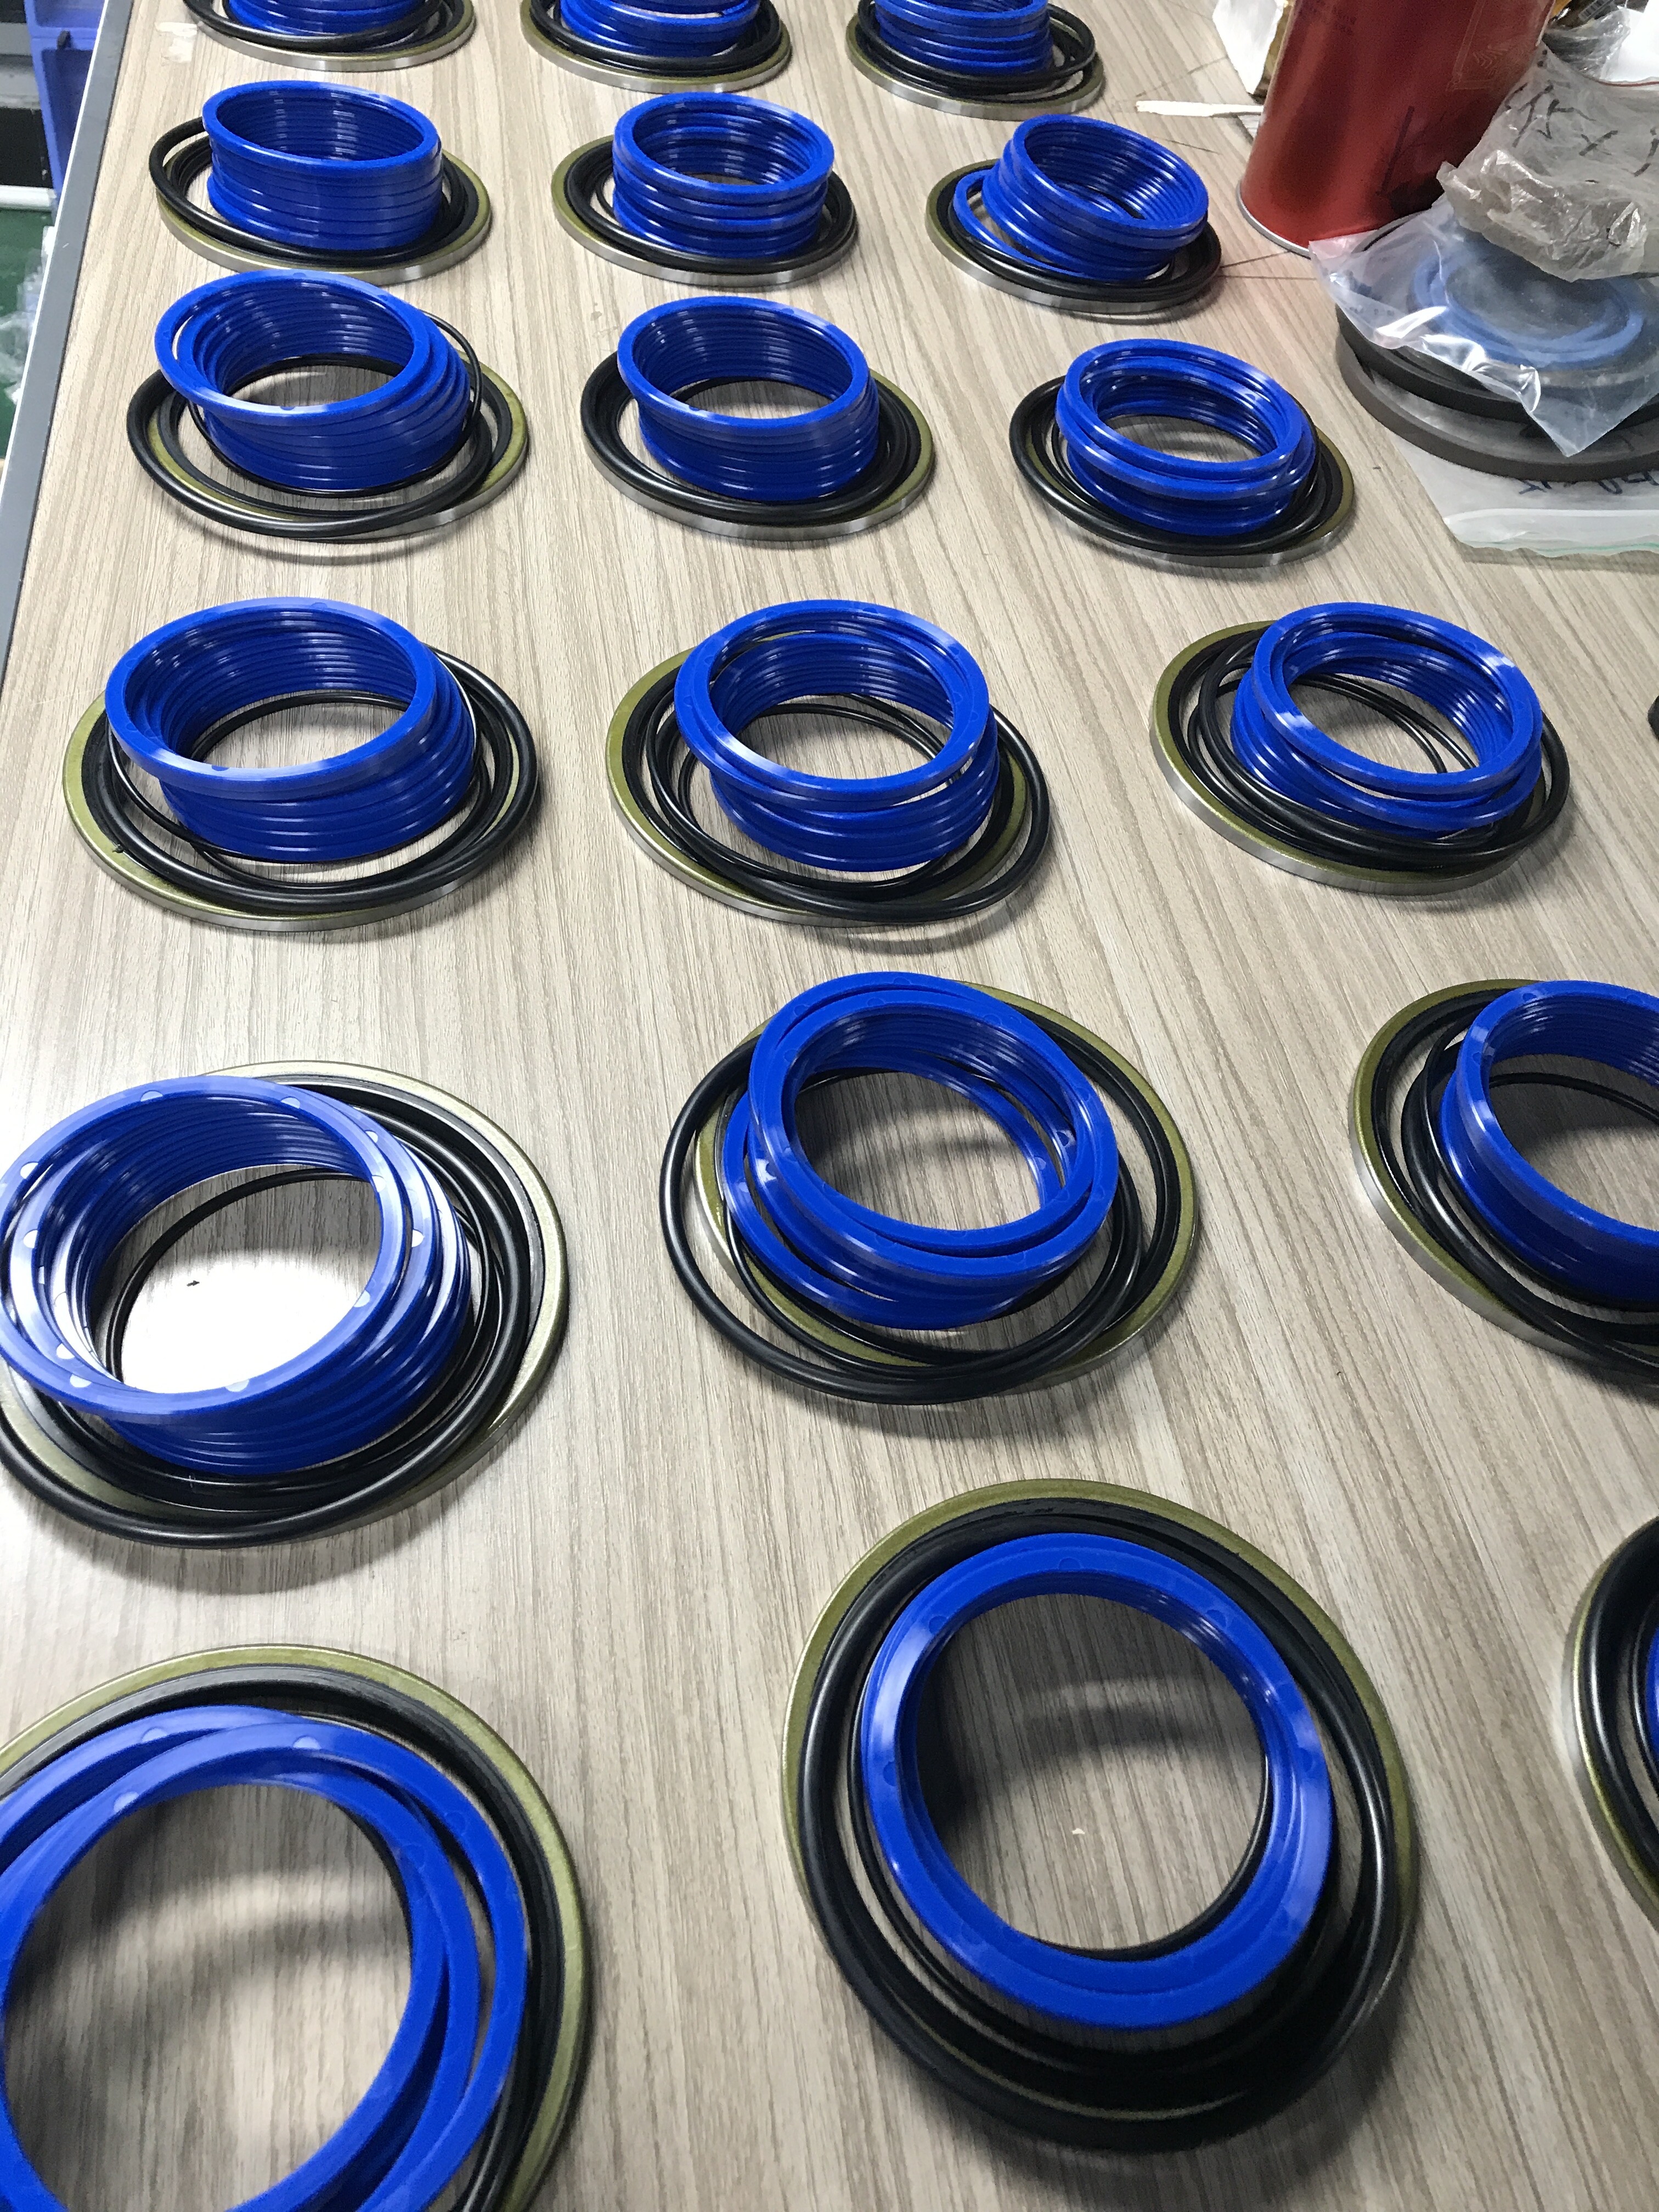 Excavator Hydraulic Pump Seal Kit- Minimize the Risk And Operating at Peak Efficiency.